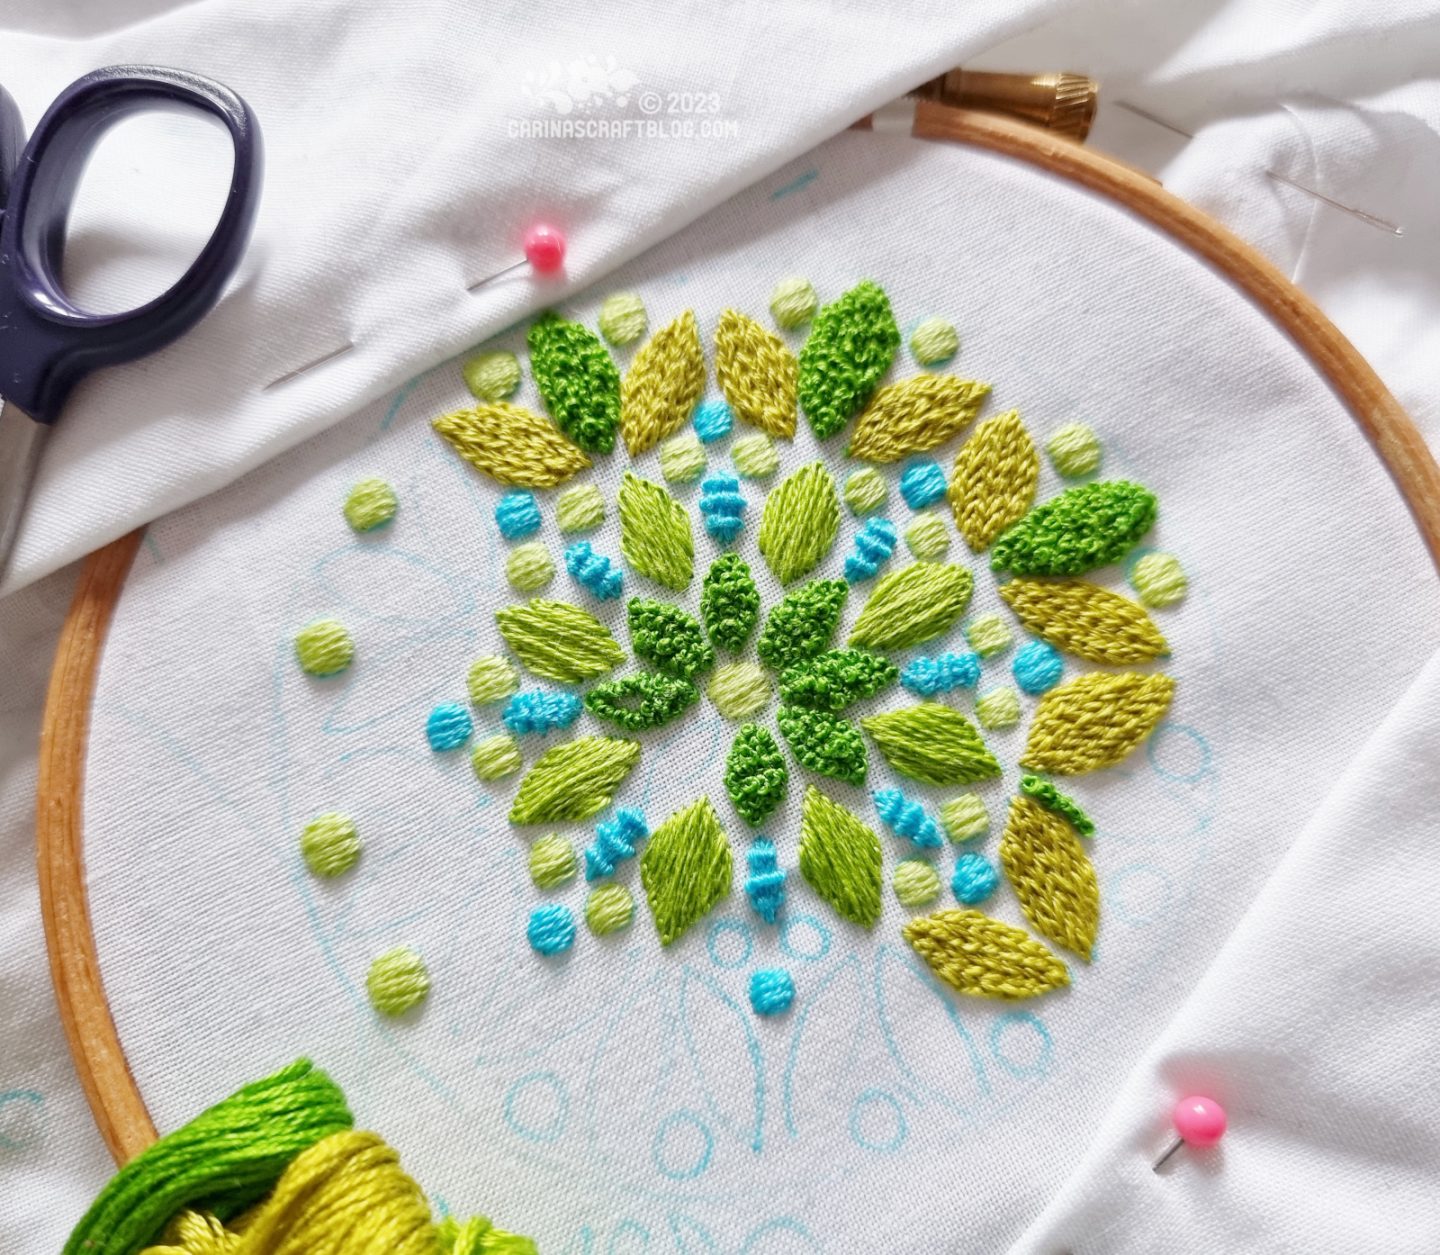 White fabric in a small wooden embroidery hoop. On the fabric is a partially embroidered mandala inspired design in green.